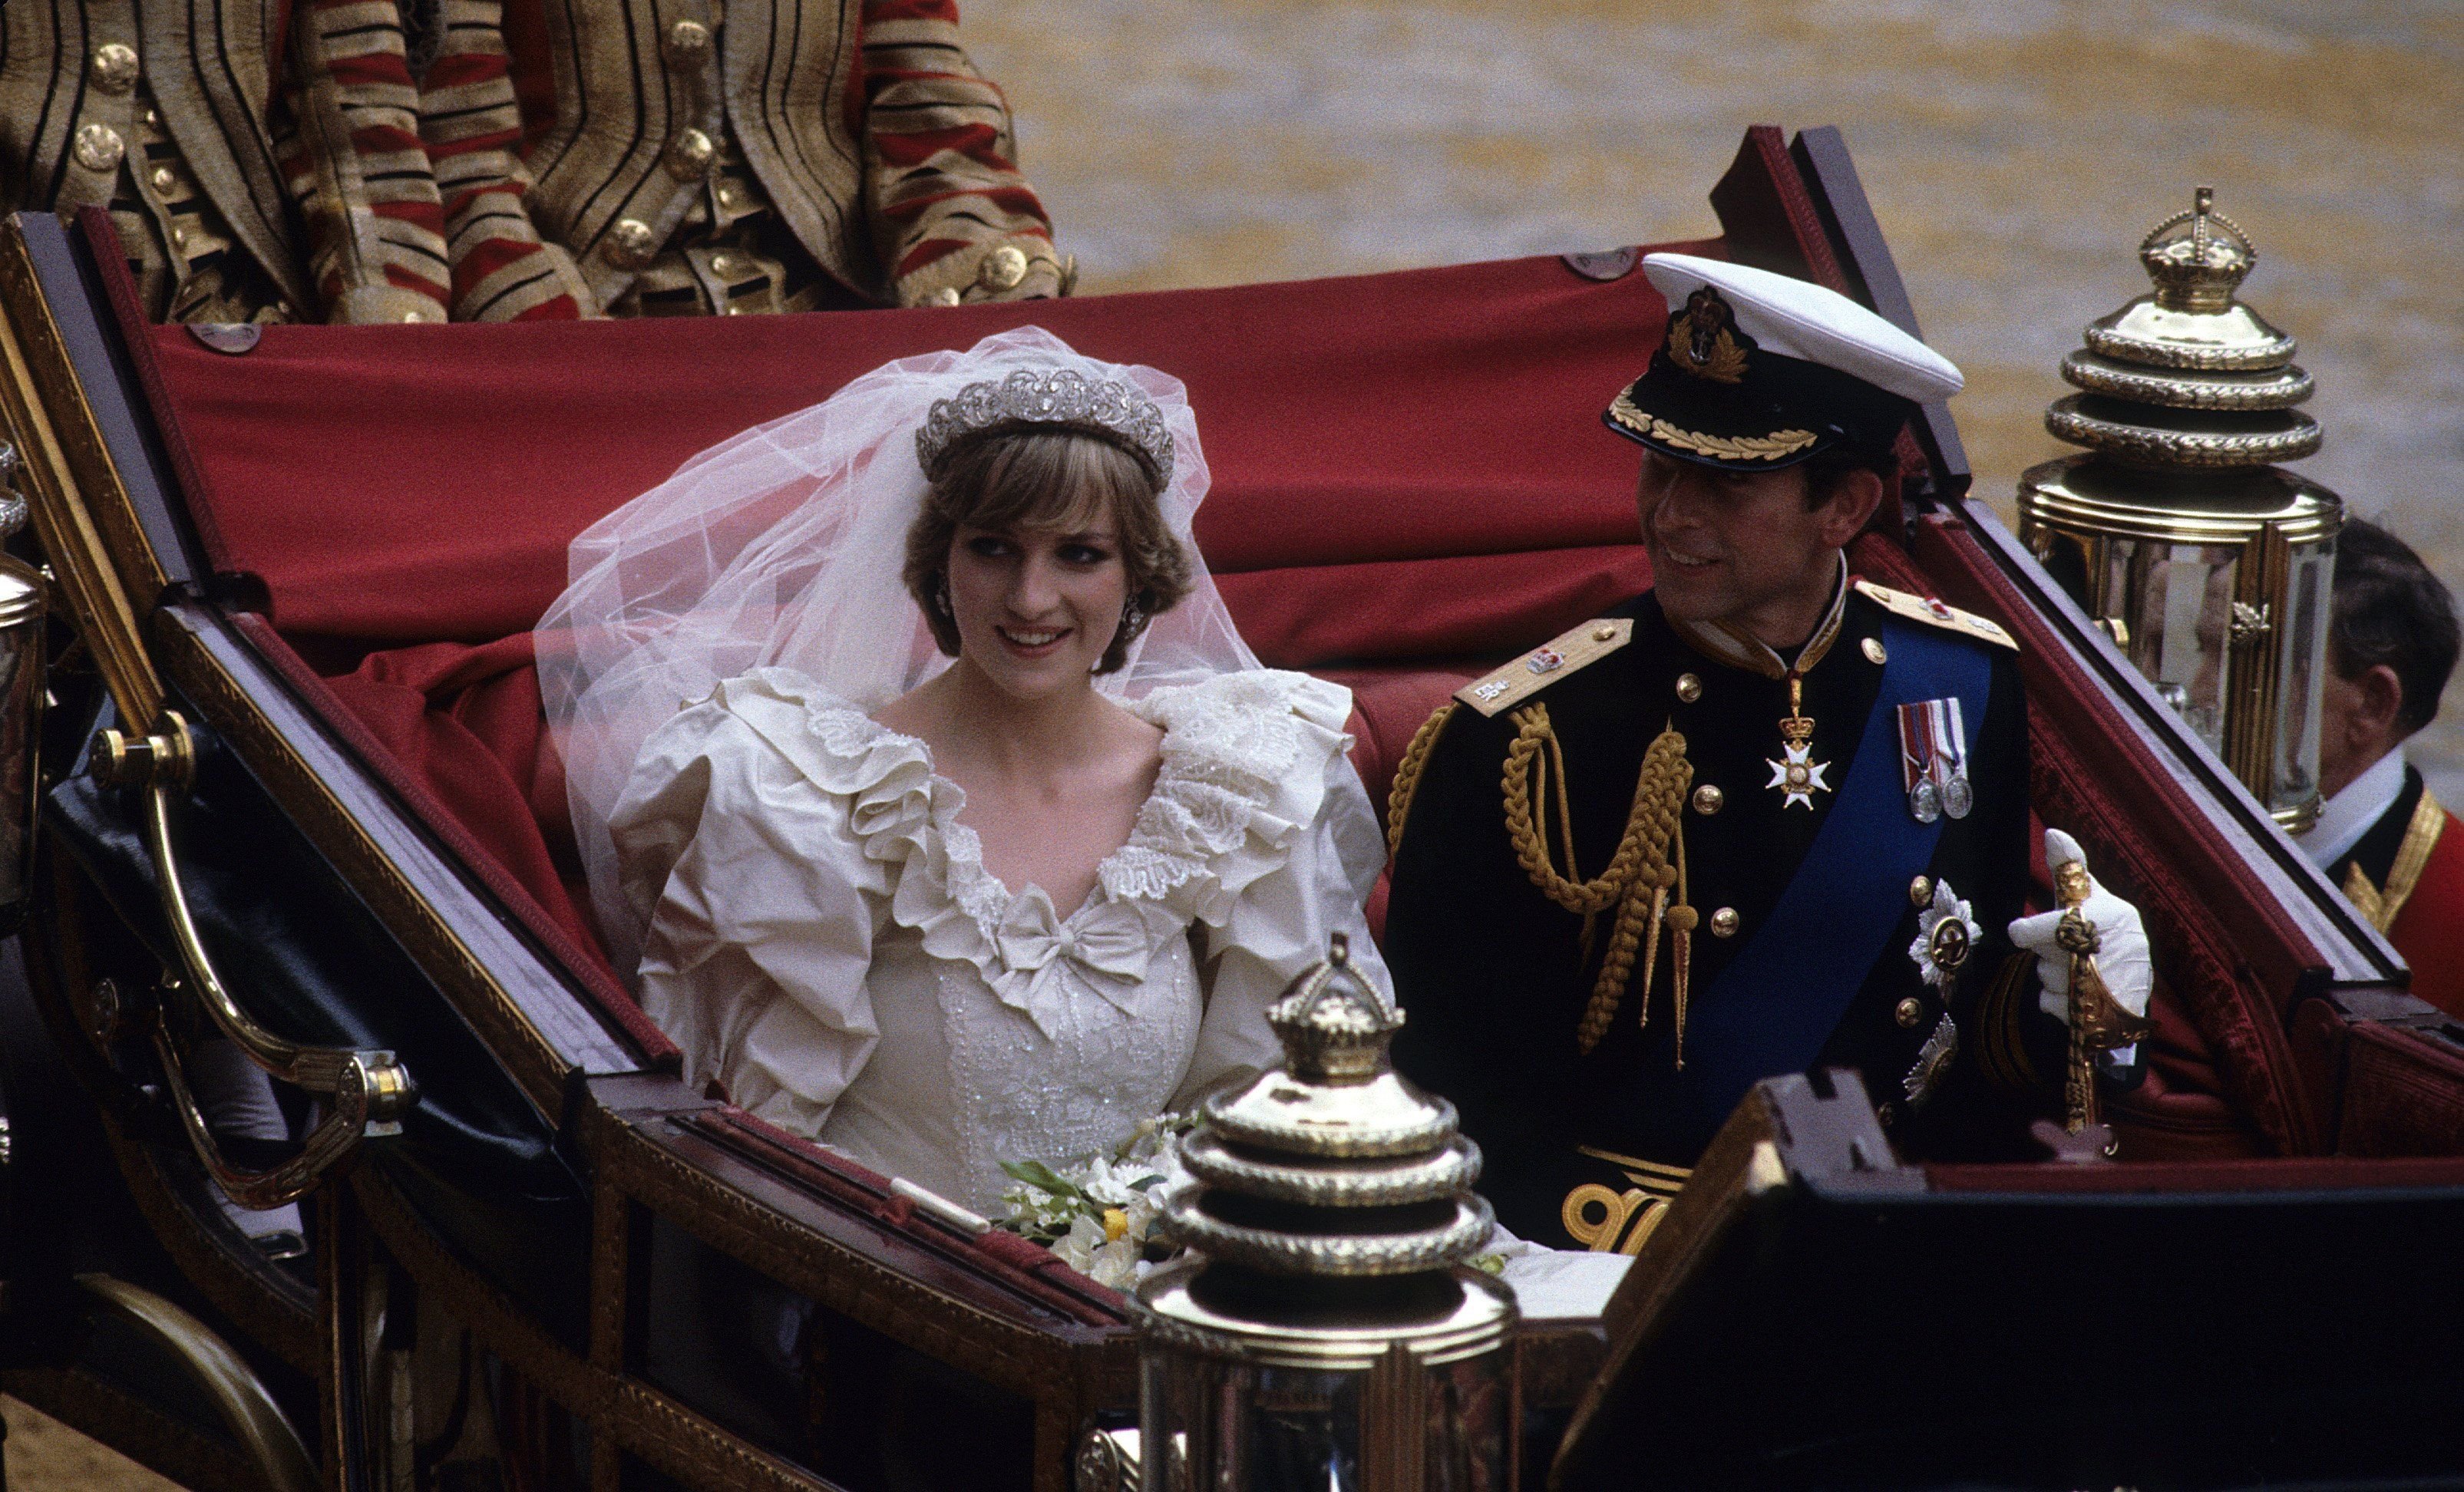 Princess DIana and Prince Charles on their wedding day, July 29, 1981| Source: Getty Images